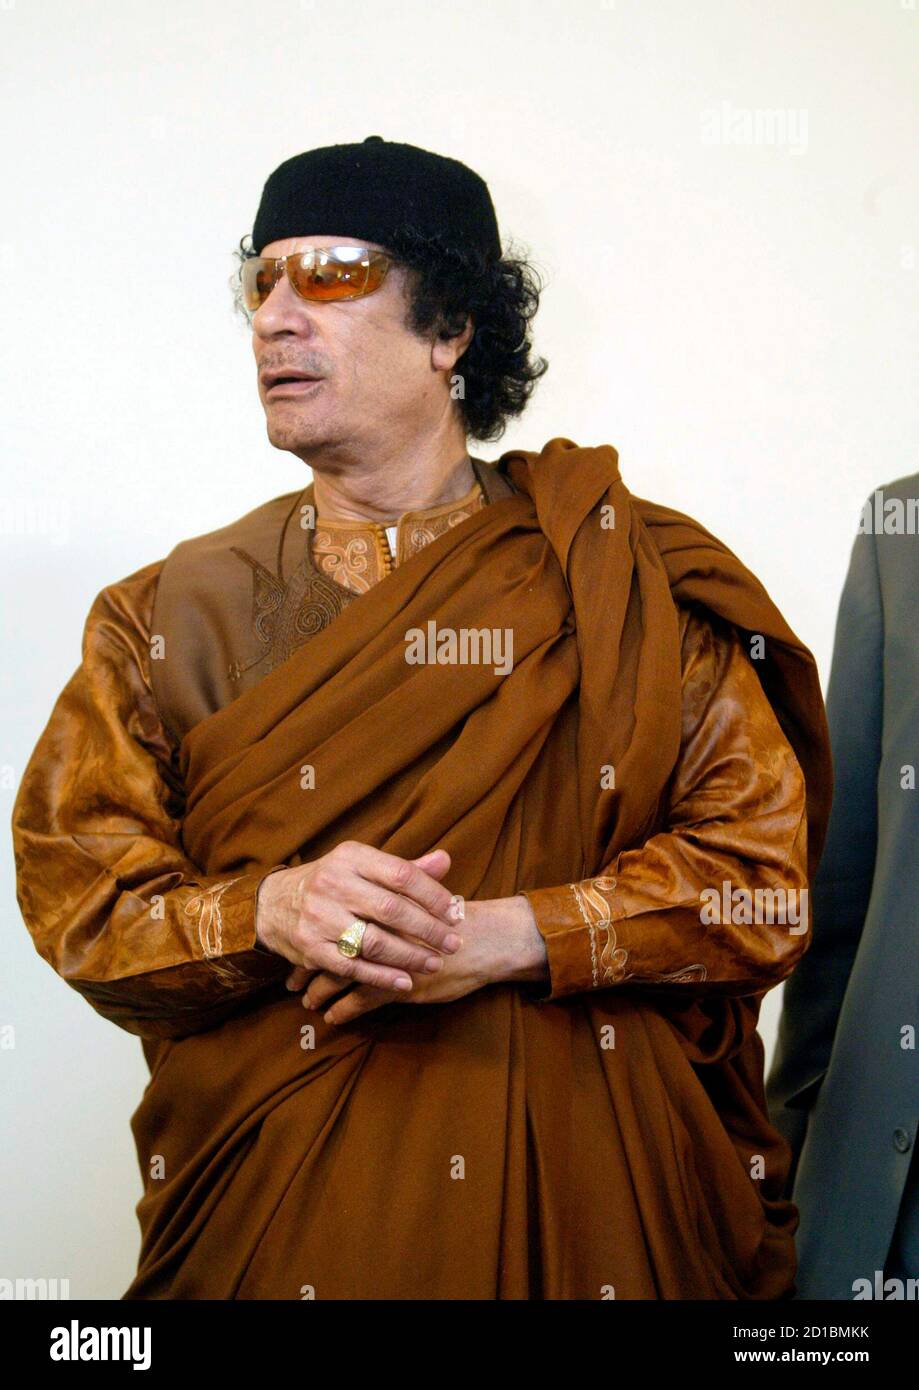 Libyan leader Muammar Gaddafi looks on during his debate on democracy with two Western scholars in the desert in Sebha March 2, 2007, in a move apparently designed to further the resumption of international ties following years of isolation. Speaking on the 30th anniversary of his declaration of a Jamahiriyah or state of the masses, Gaddafi said Libya was embracing globalisation and the outside world after years of sanctions but insisted his experiment in rule by town hall meetings was fairer than the West's ballot box democracy. REUTERS/Louafi Larbi (LIBYA) Stock Photo